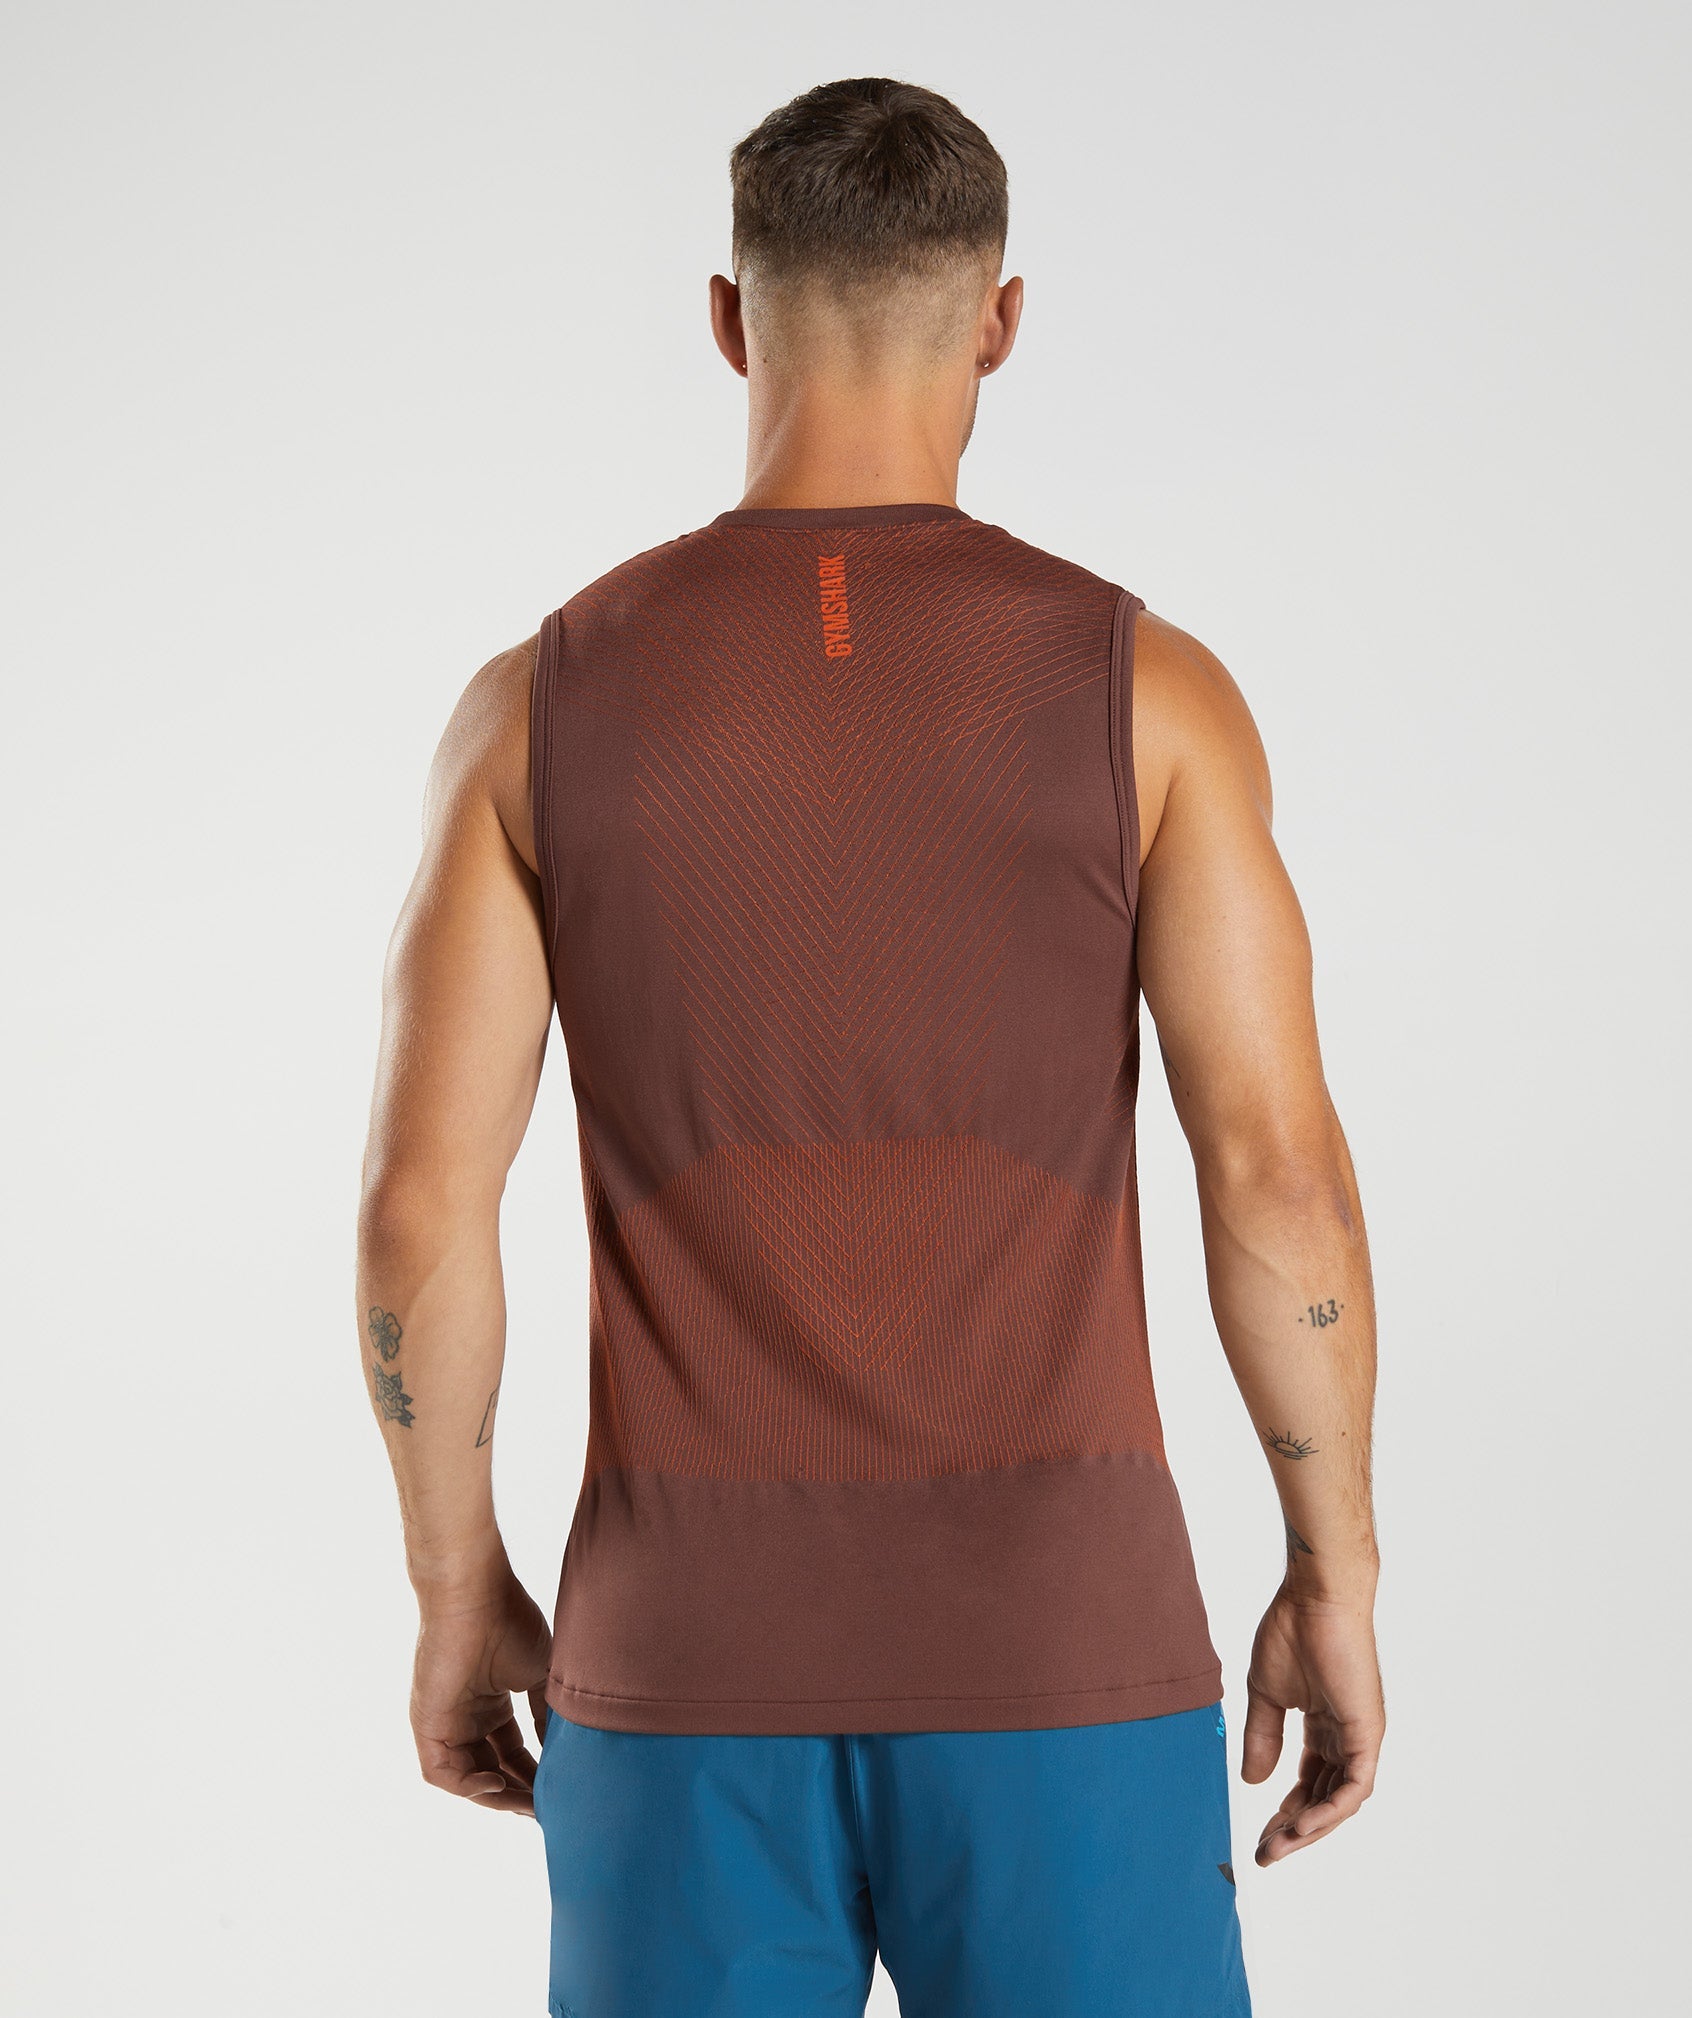 Apex Seamless Tank in Cherry Brown/Pepper Red - view 2